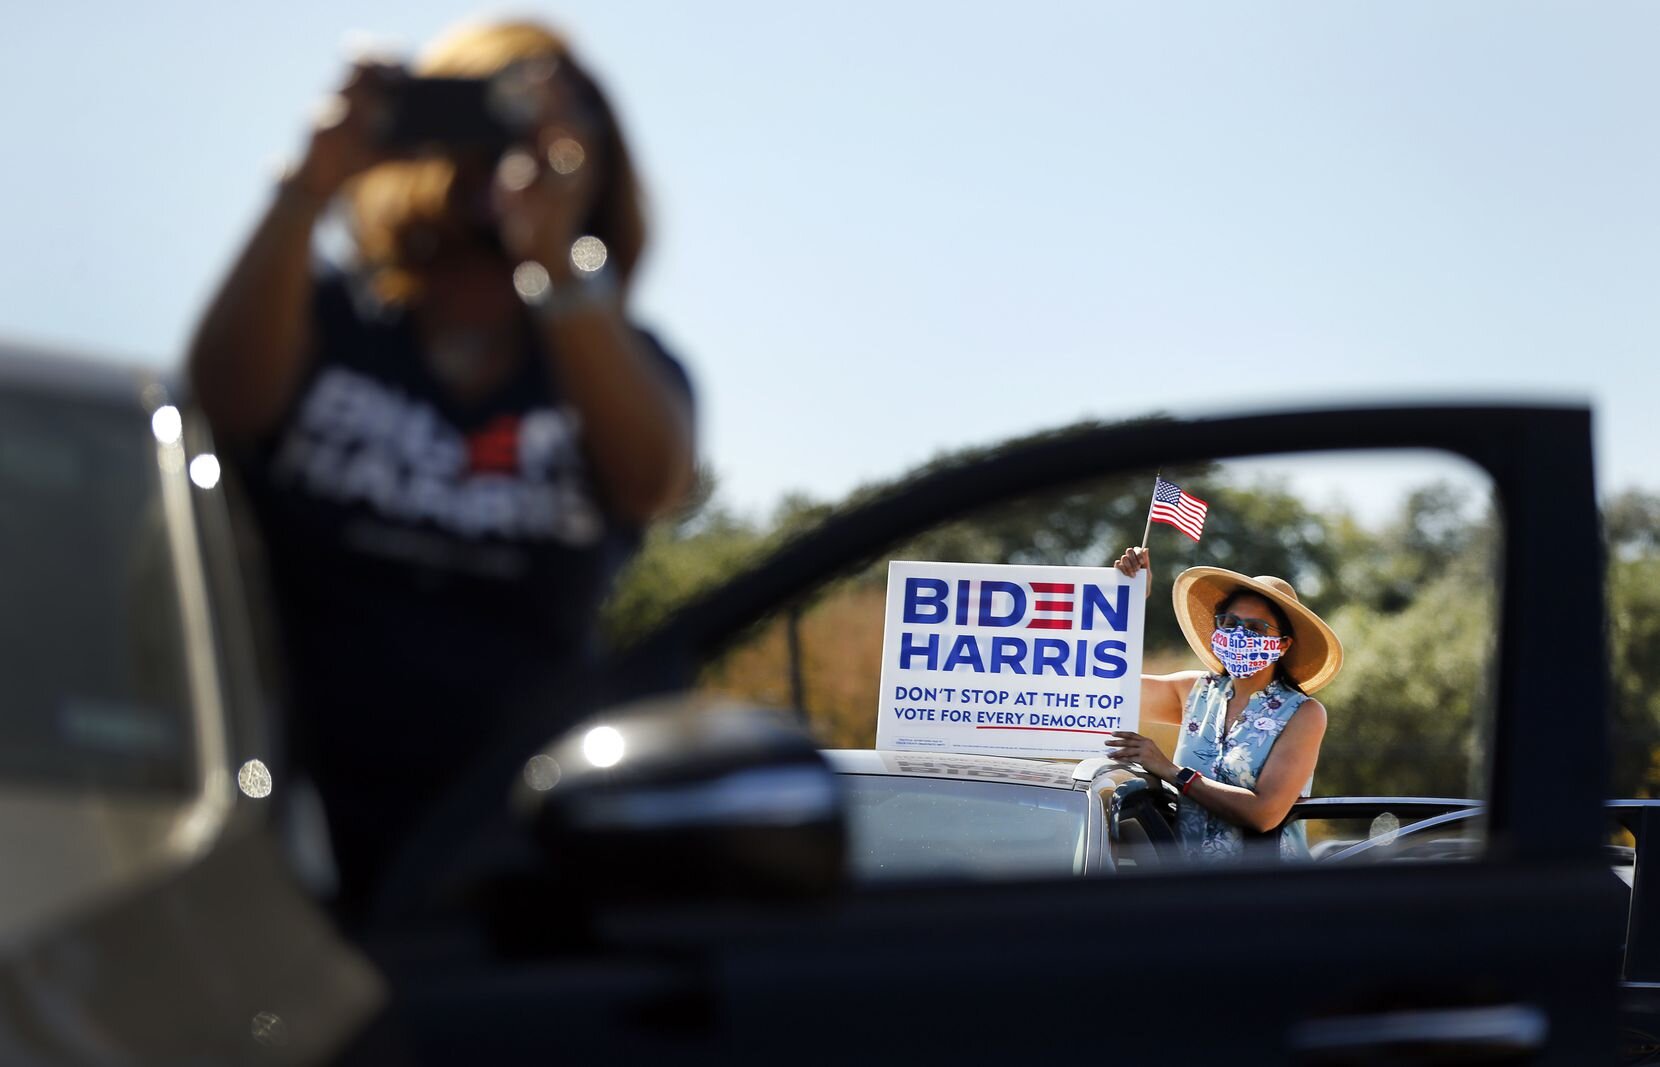 ‘There are no do-overs,’ says Jill Biden as she rallies voters in Dallas, El Paso